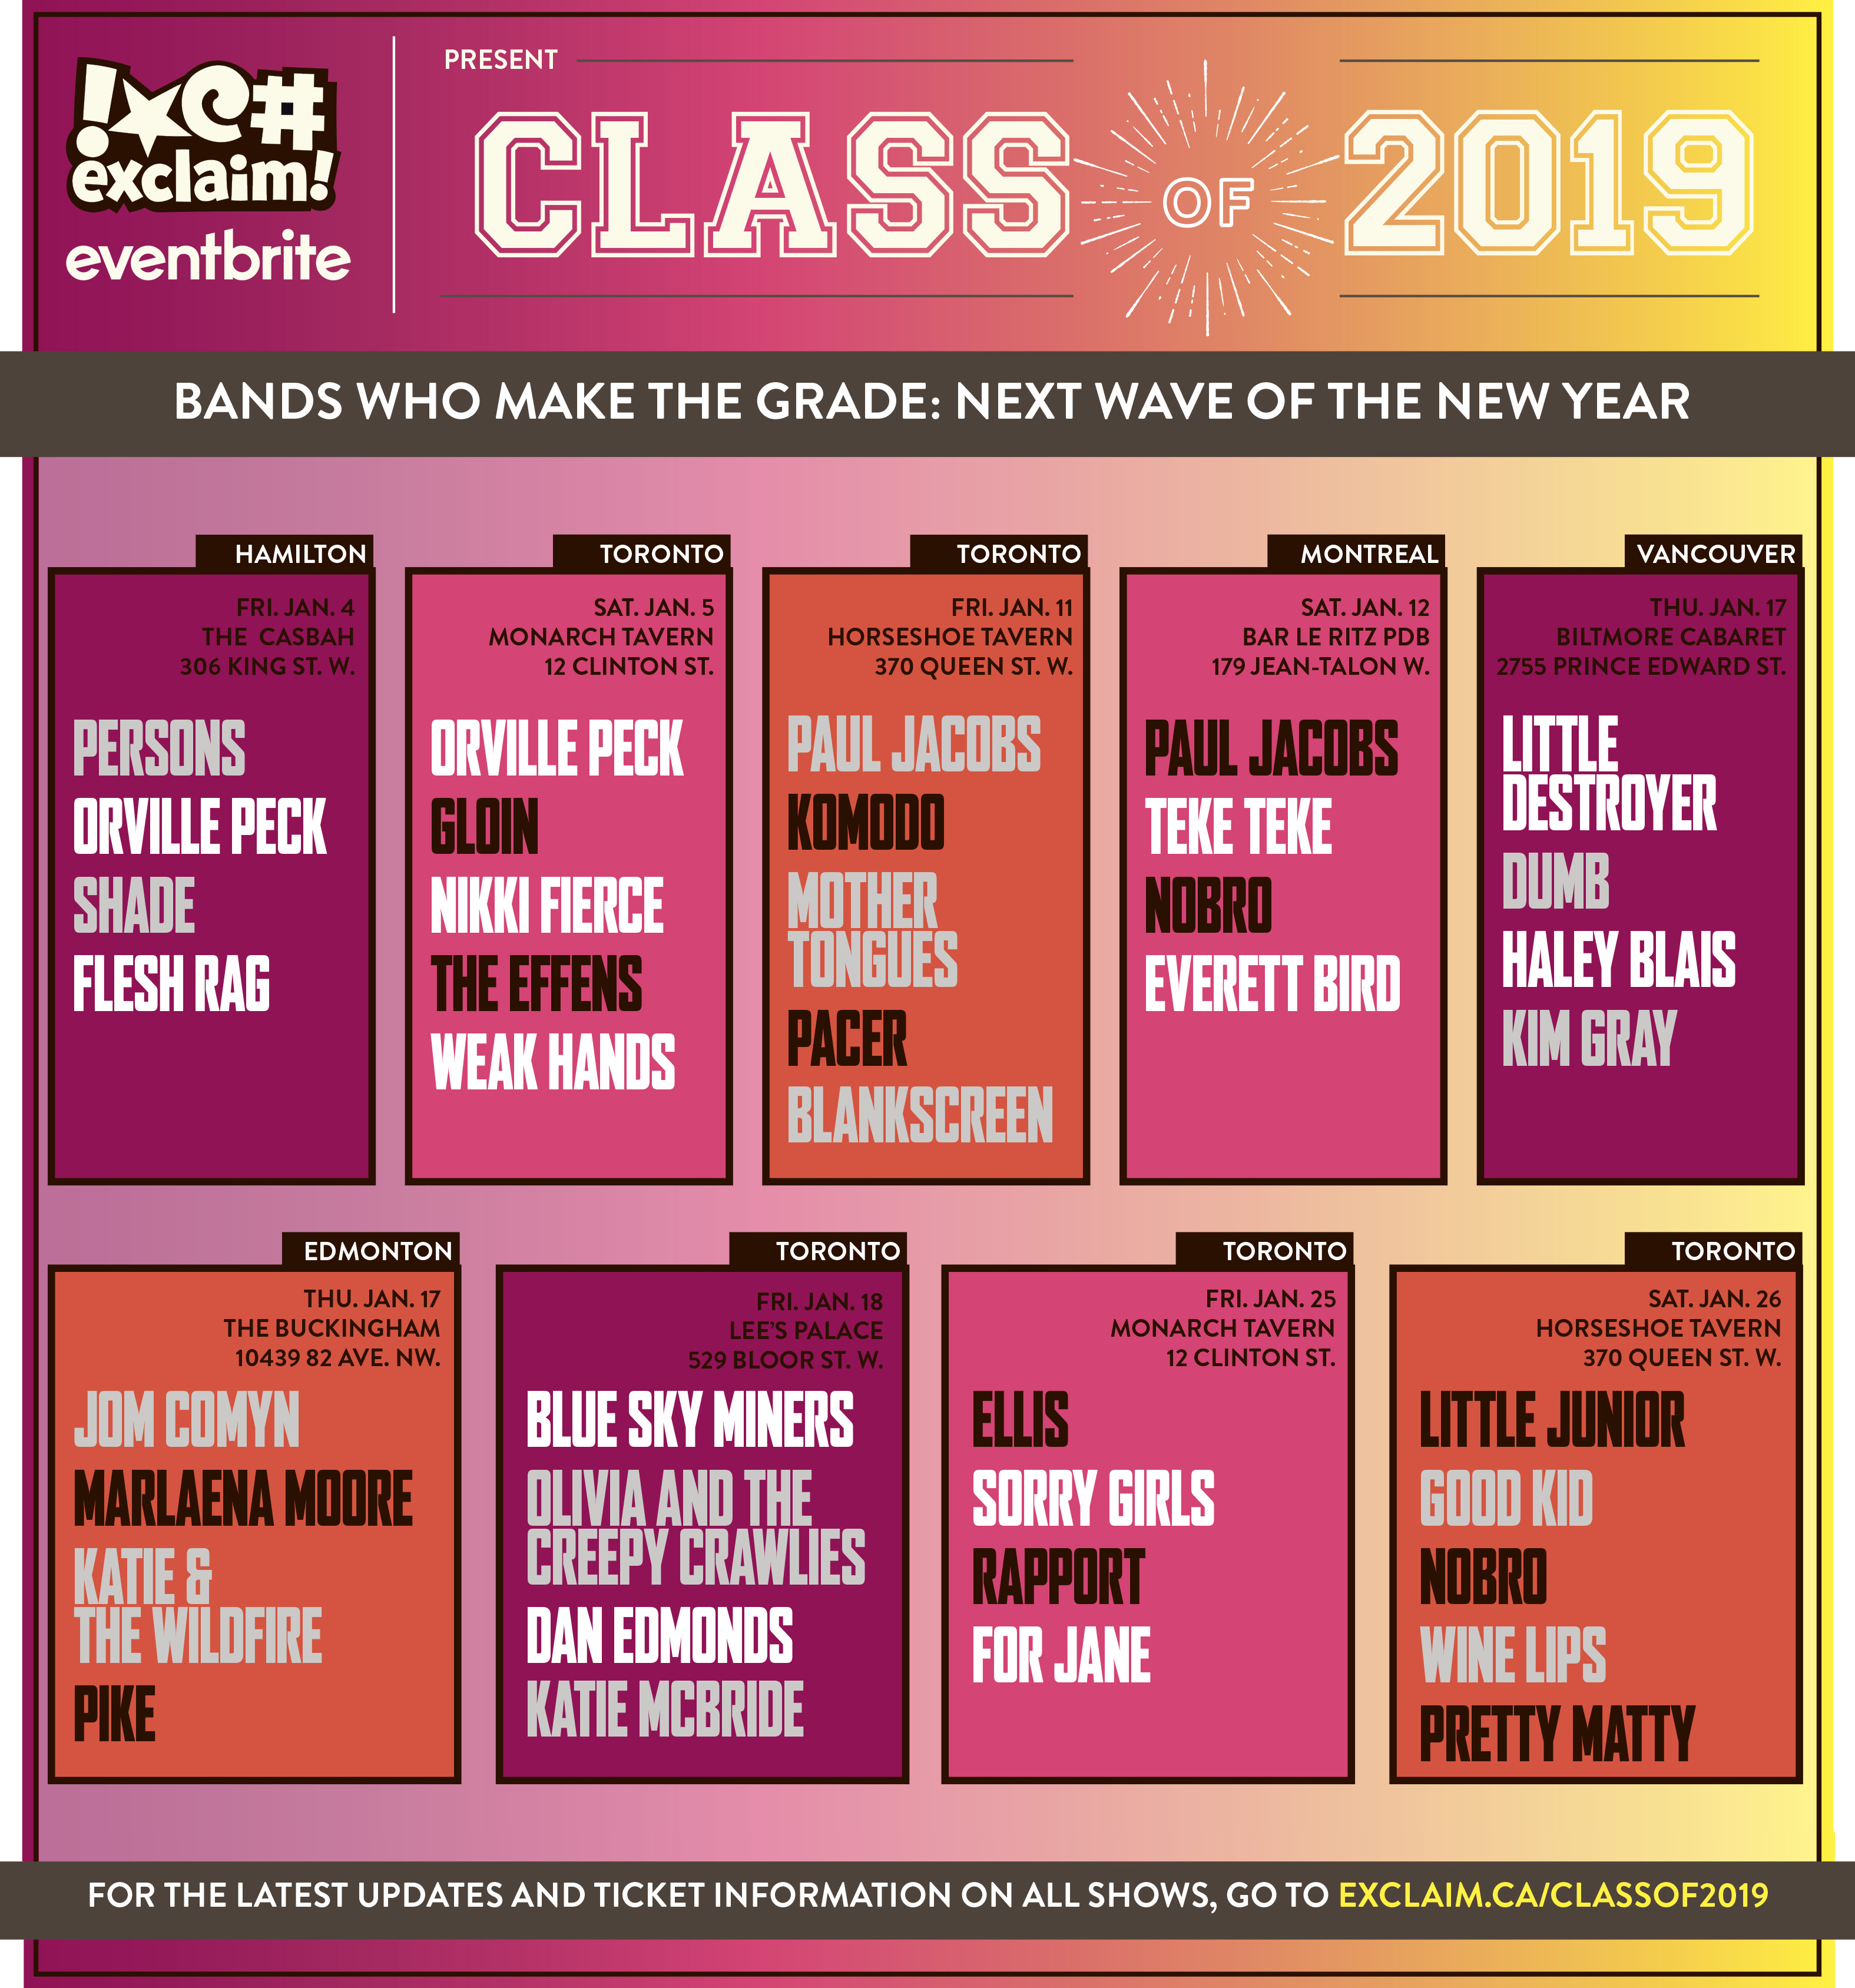 Exclaim! Presents the Class of 2019 Concert Series with Ellis, Paul Jacobs, Little Destroyer, Orville Peck 